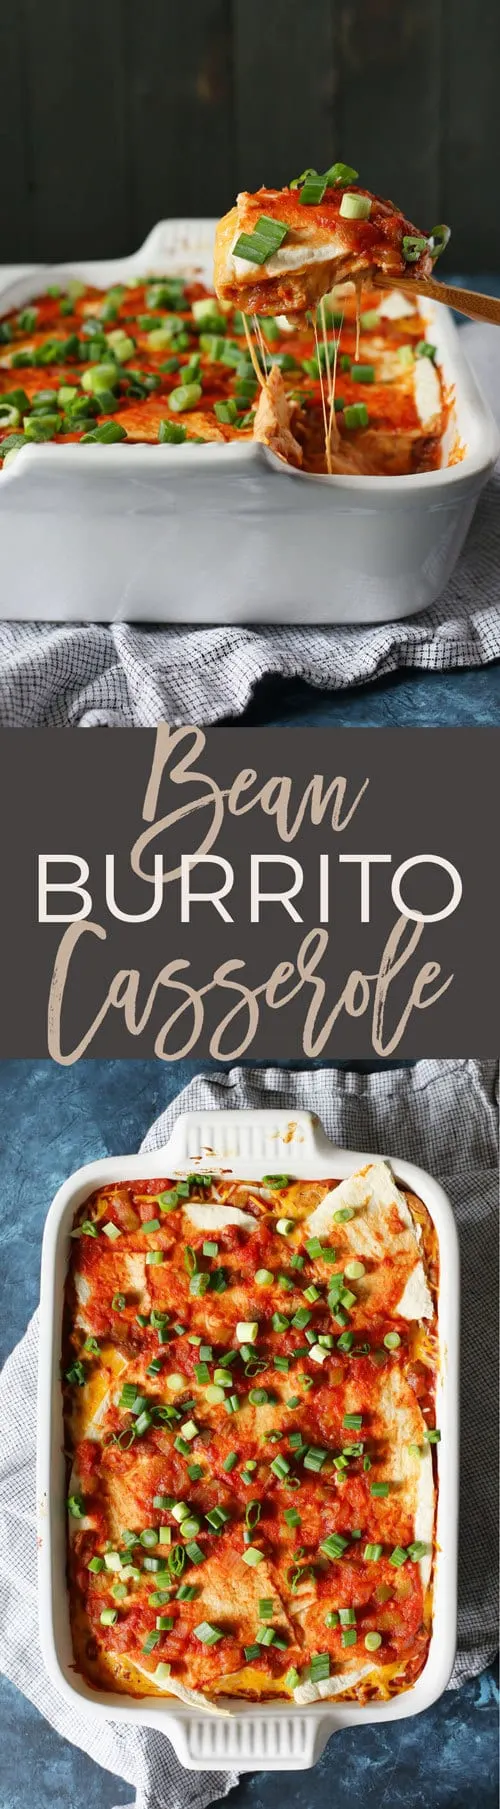 This bean burrito casserole is the perfect weeknight vegetarian freezer meal. Pull the casserole dish out of the freezer and defrost it during the day. Pop it in the oven after work and have dinner on the table in just 30 minutes!